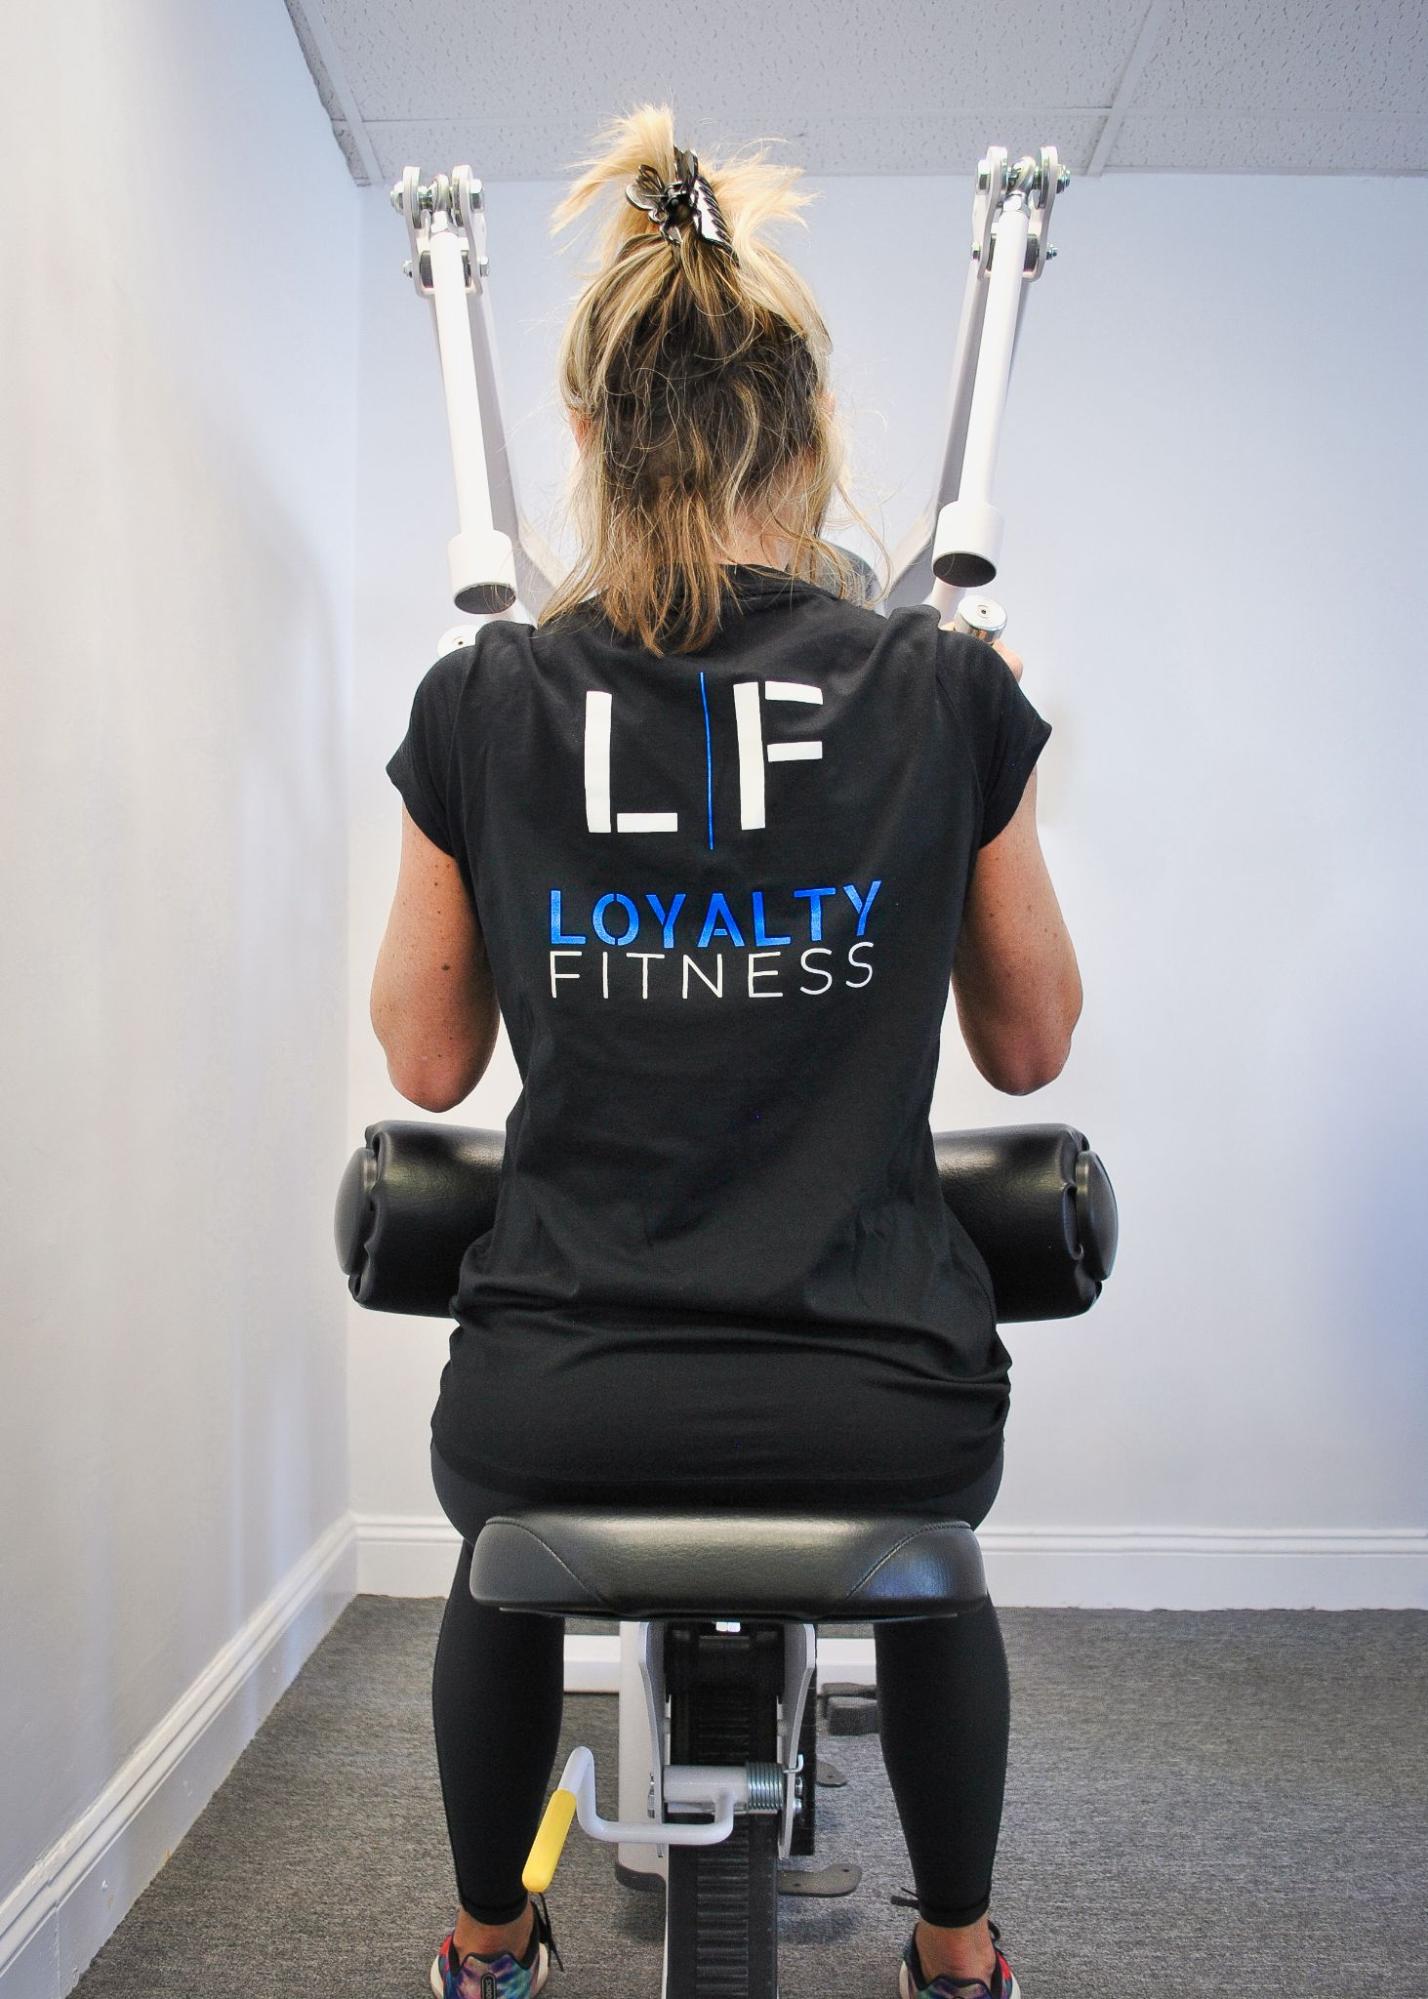 Woman wearing a shirt that says “Loyalty Fitness” with the Loyalty Fitness logo while working out on an exercise machine.